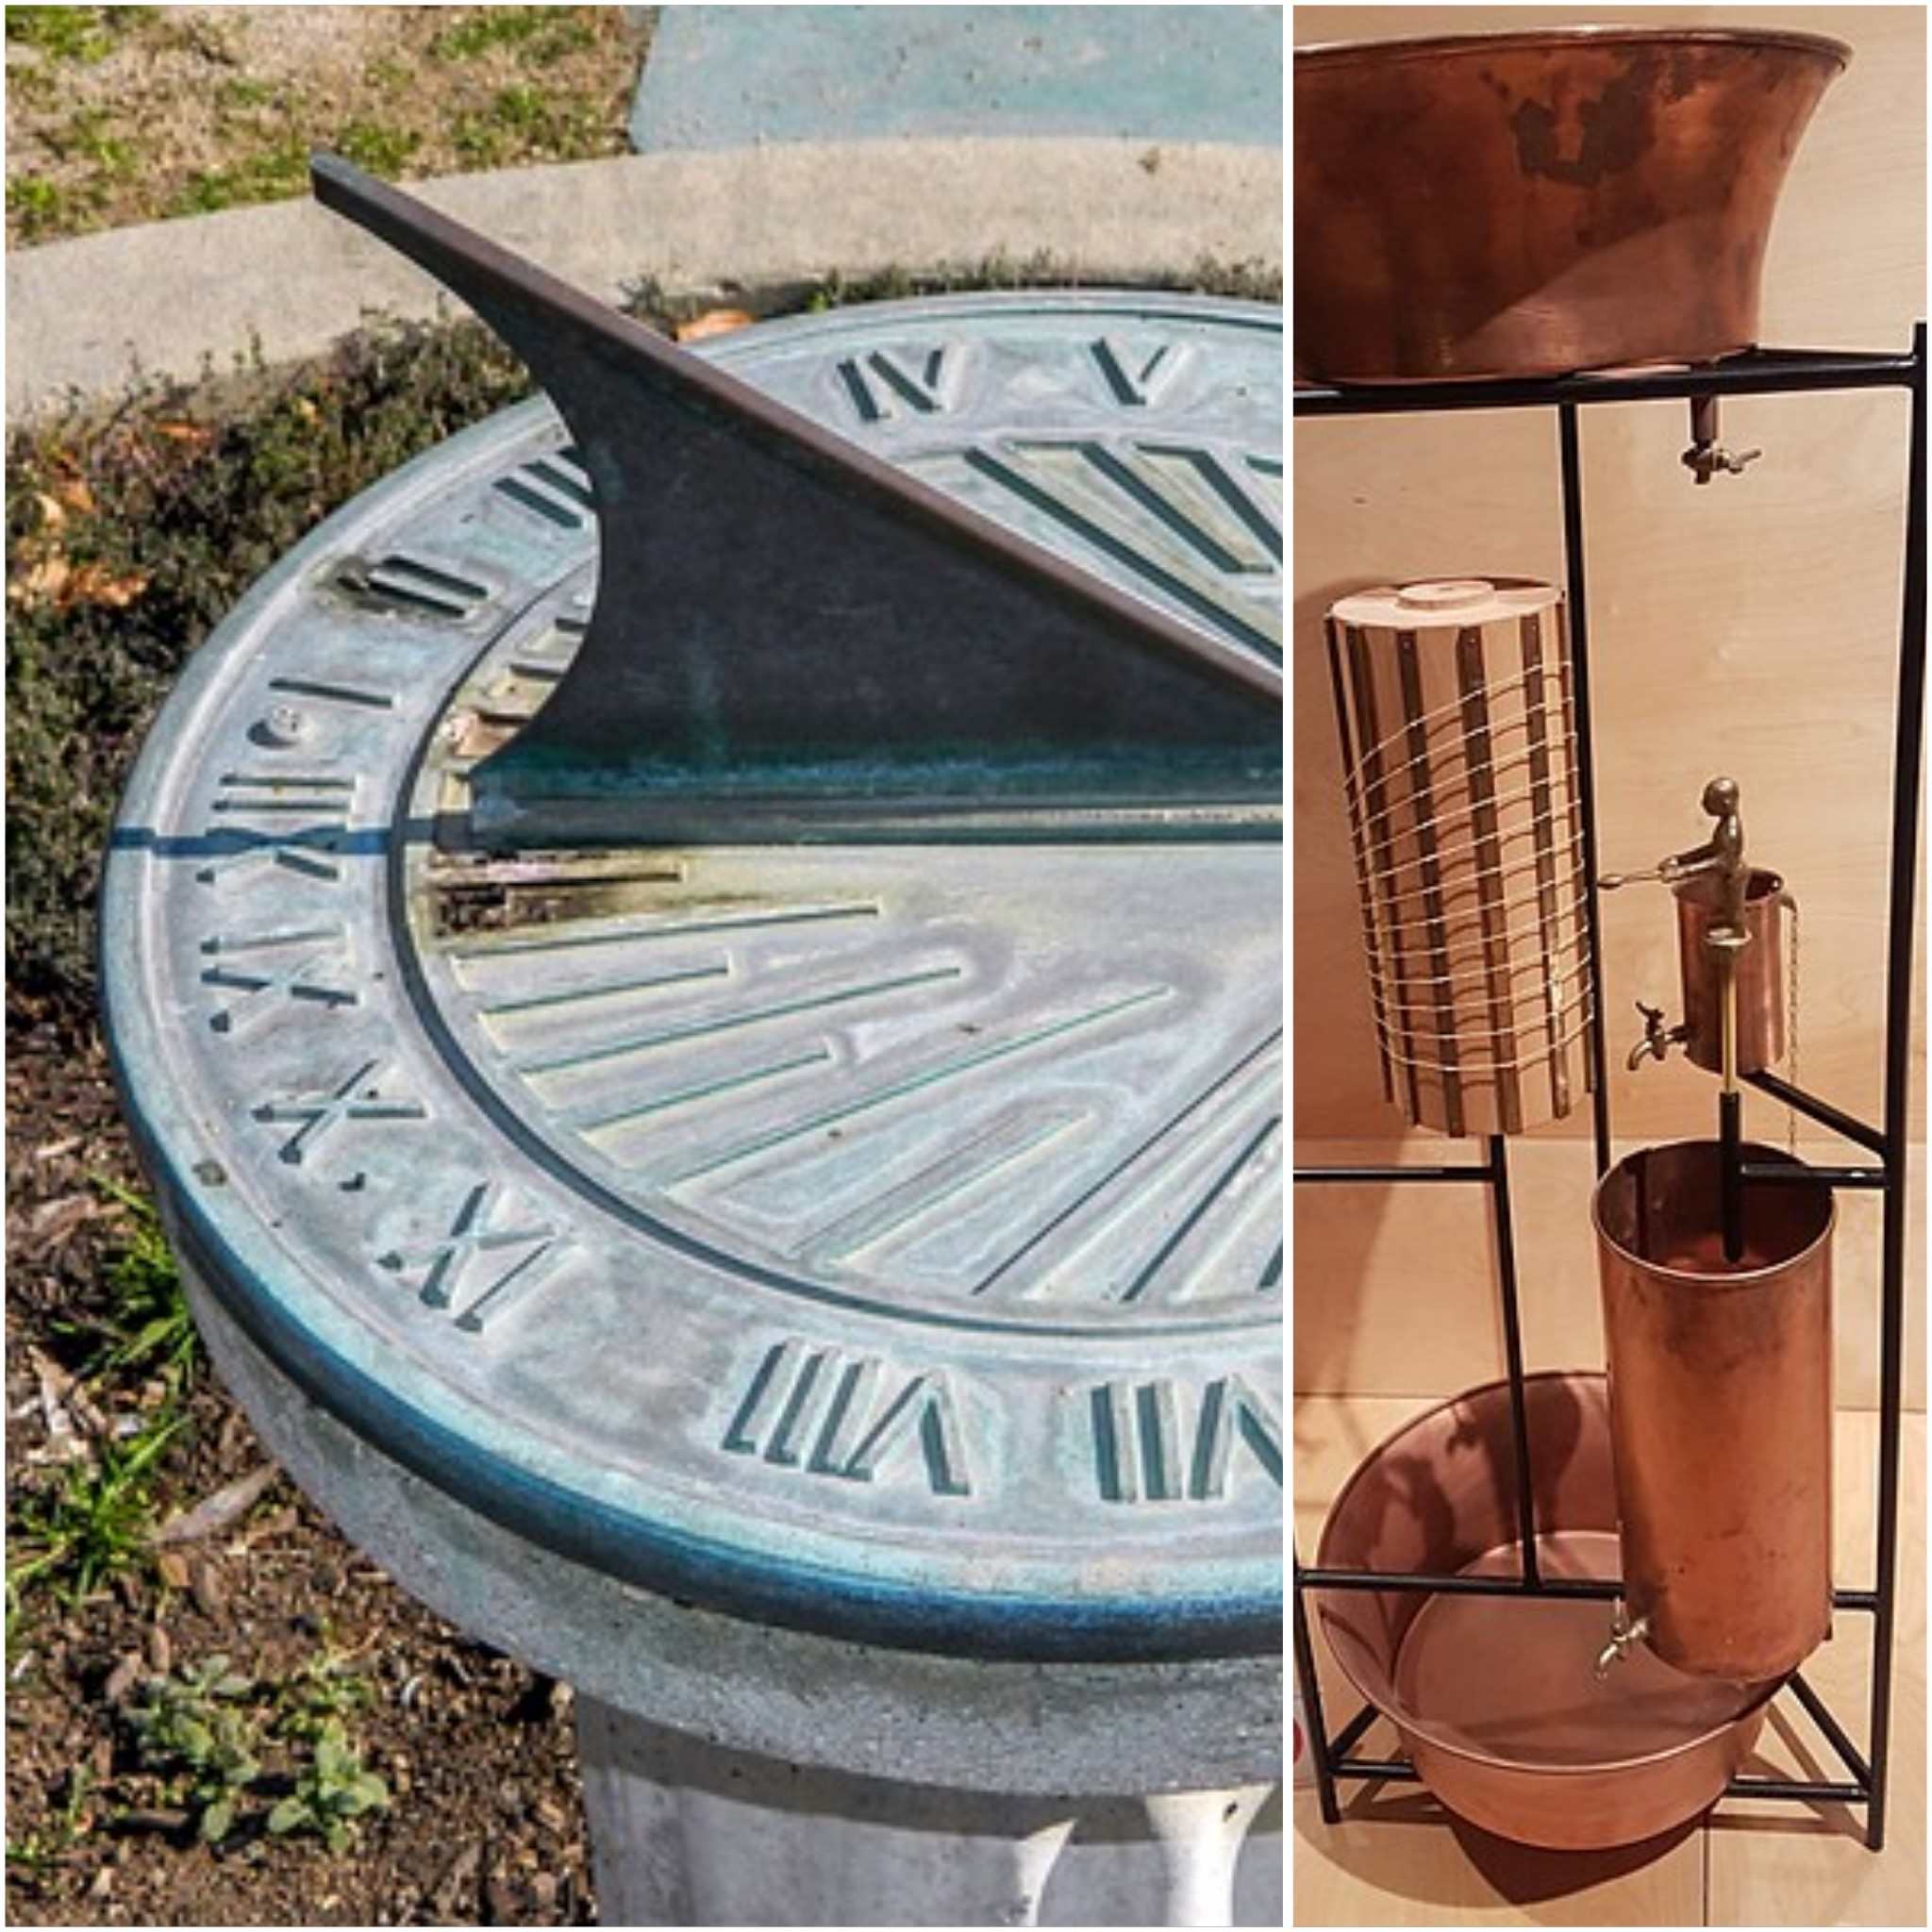 Sundial and a water clock